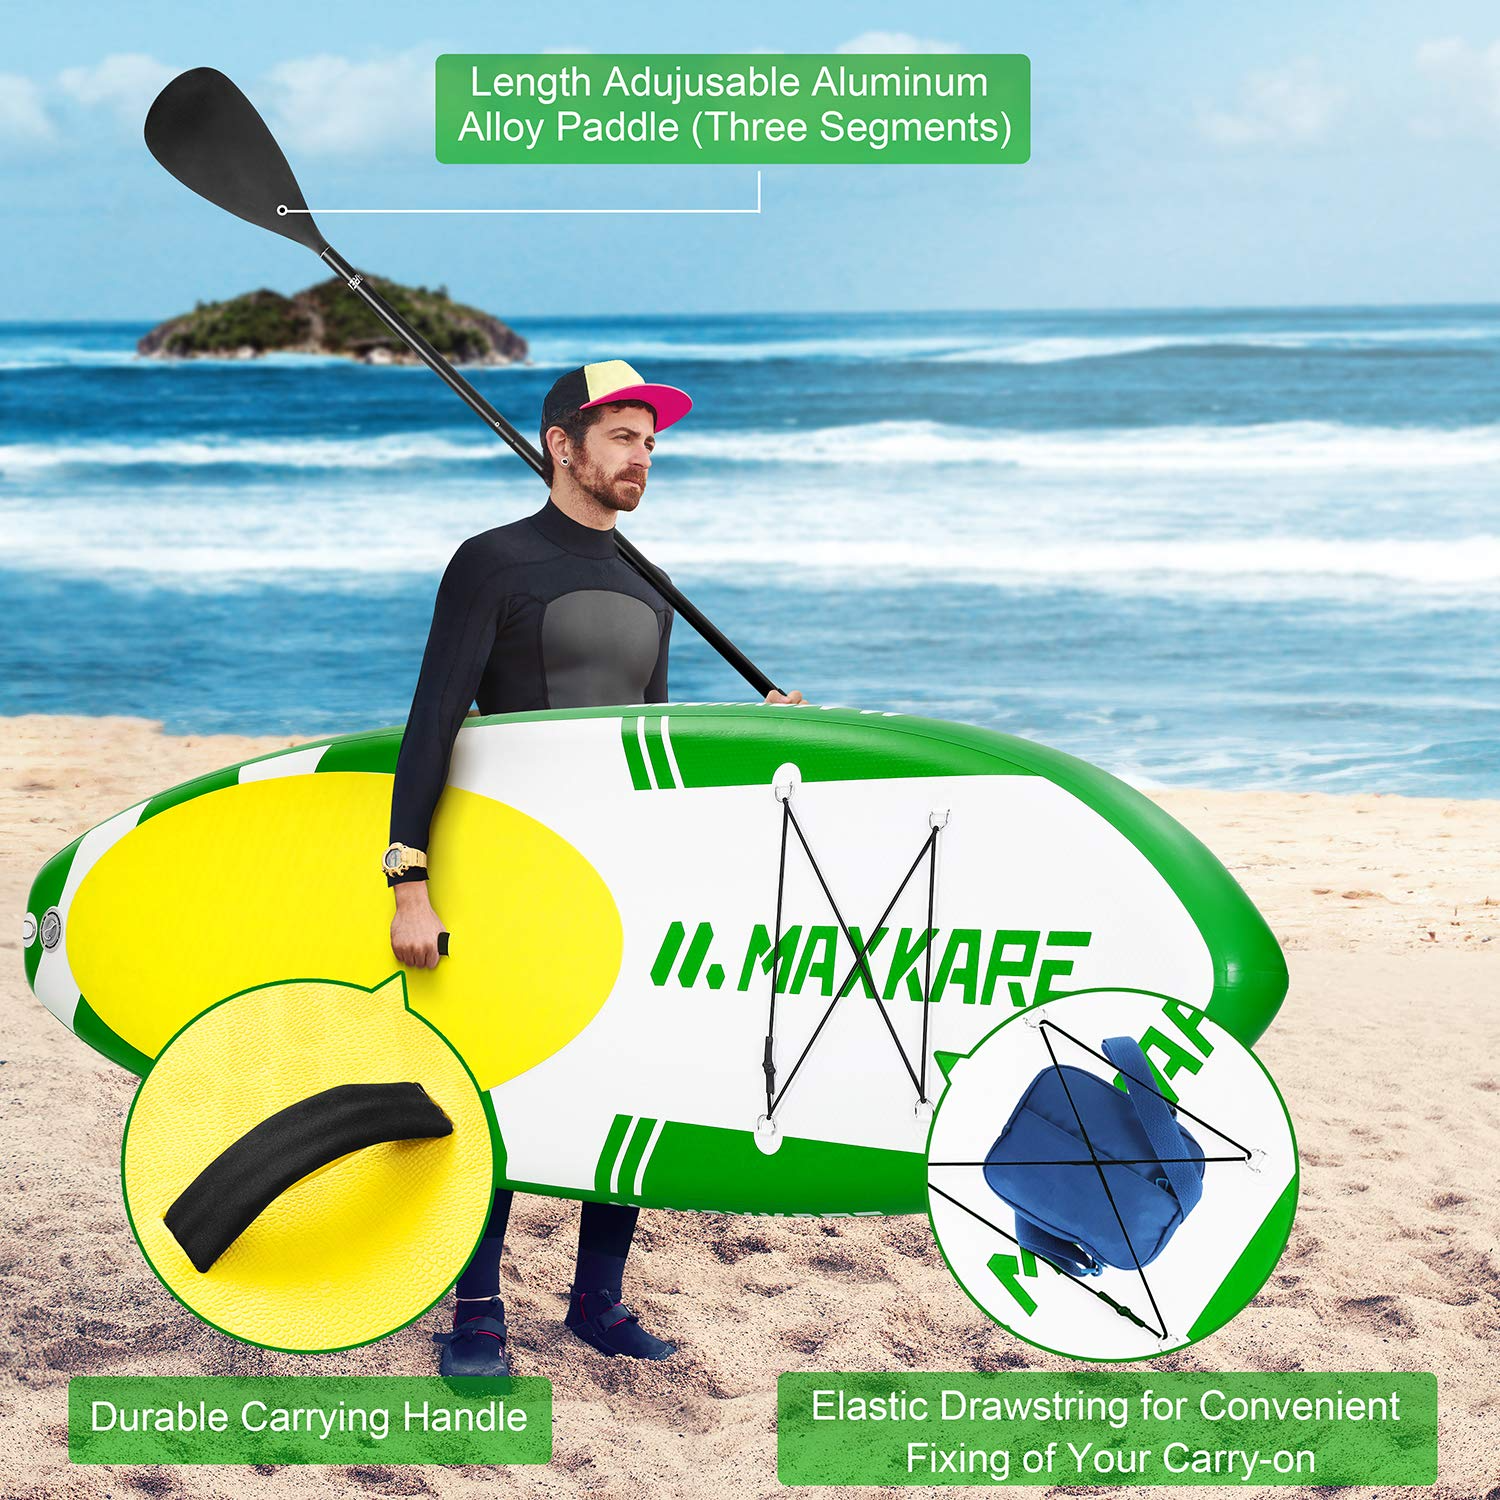 Board Board Paddle MAXKARE SUP – Inflatable Up Paddle Stand MaxKare